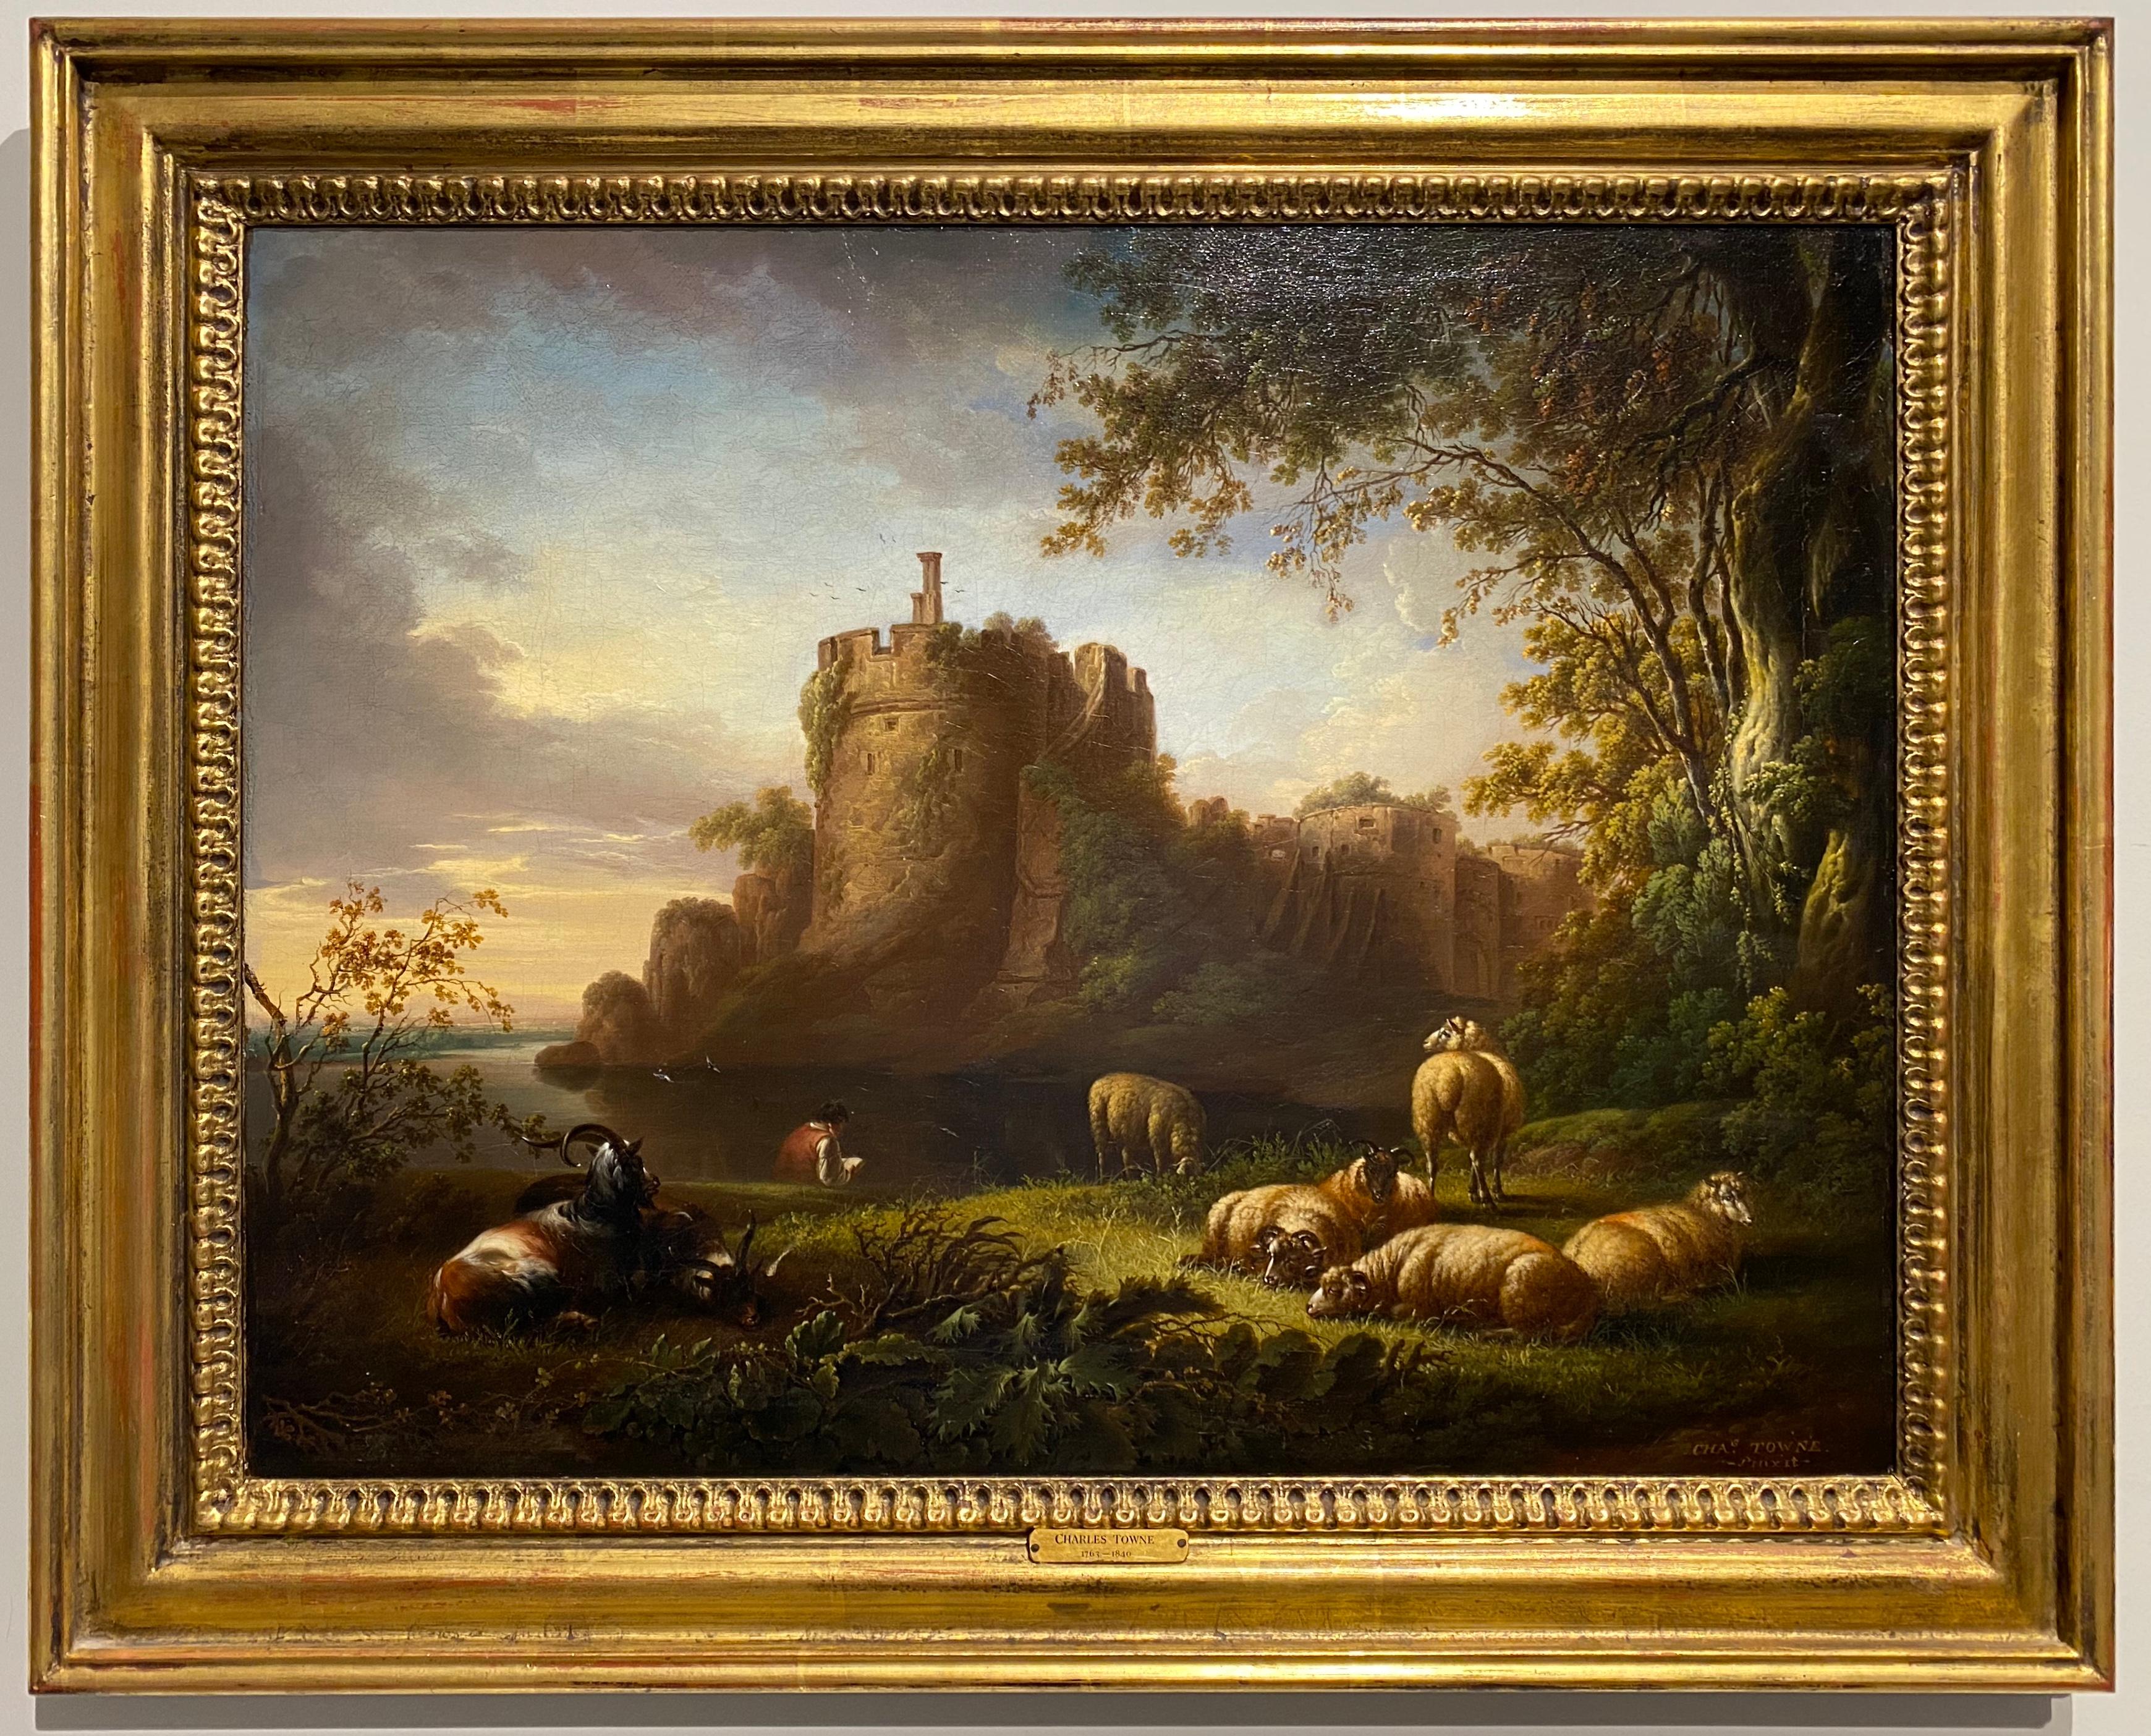 A young poet seated in a landscape before ruins, with sheep and goats resting - Painting by Charles Towne